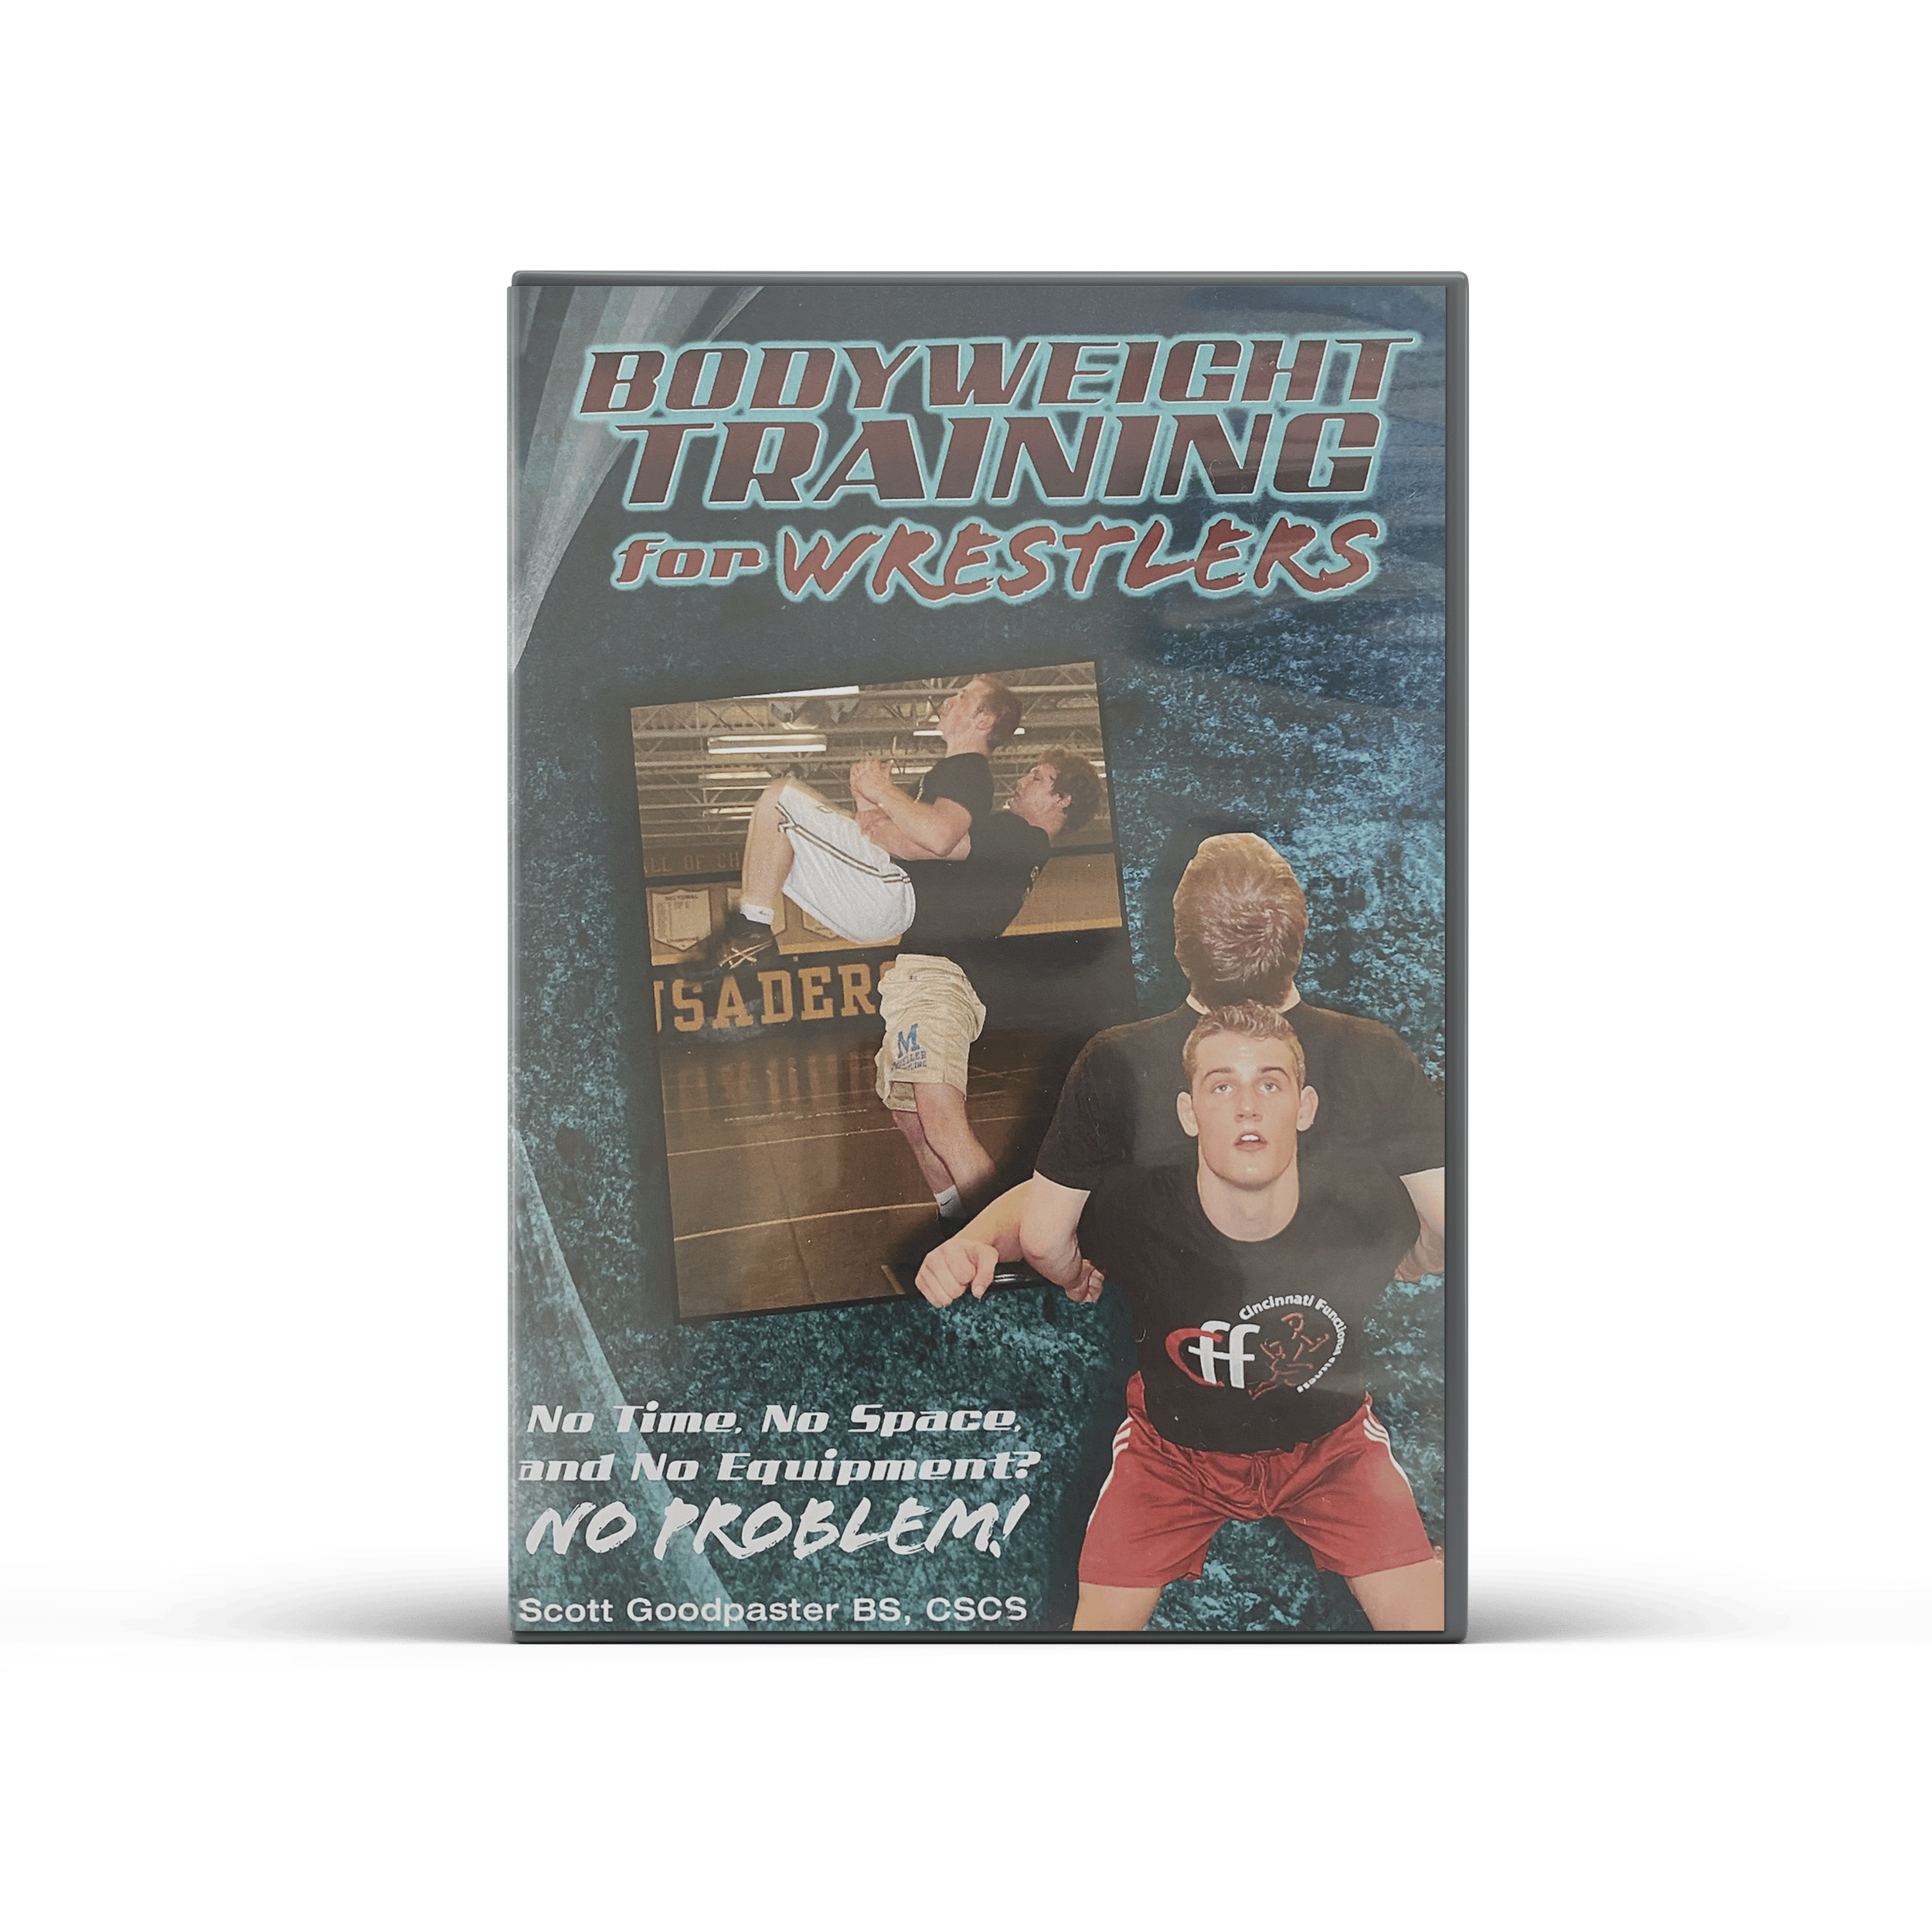 Bodyweight Training for Wrestlers DVD Mockup front